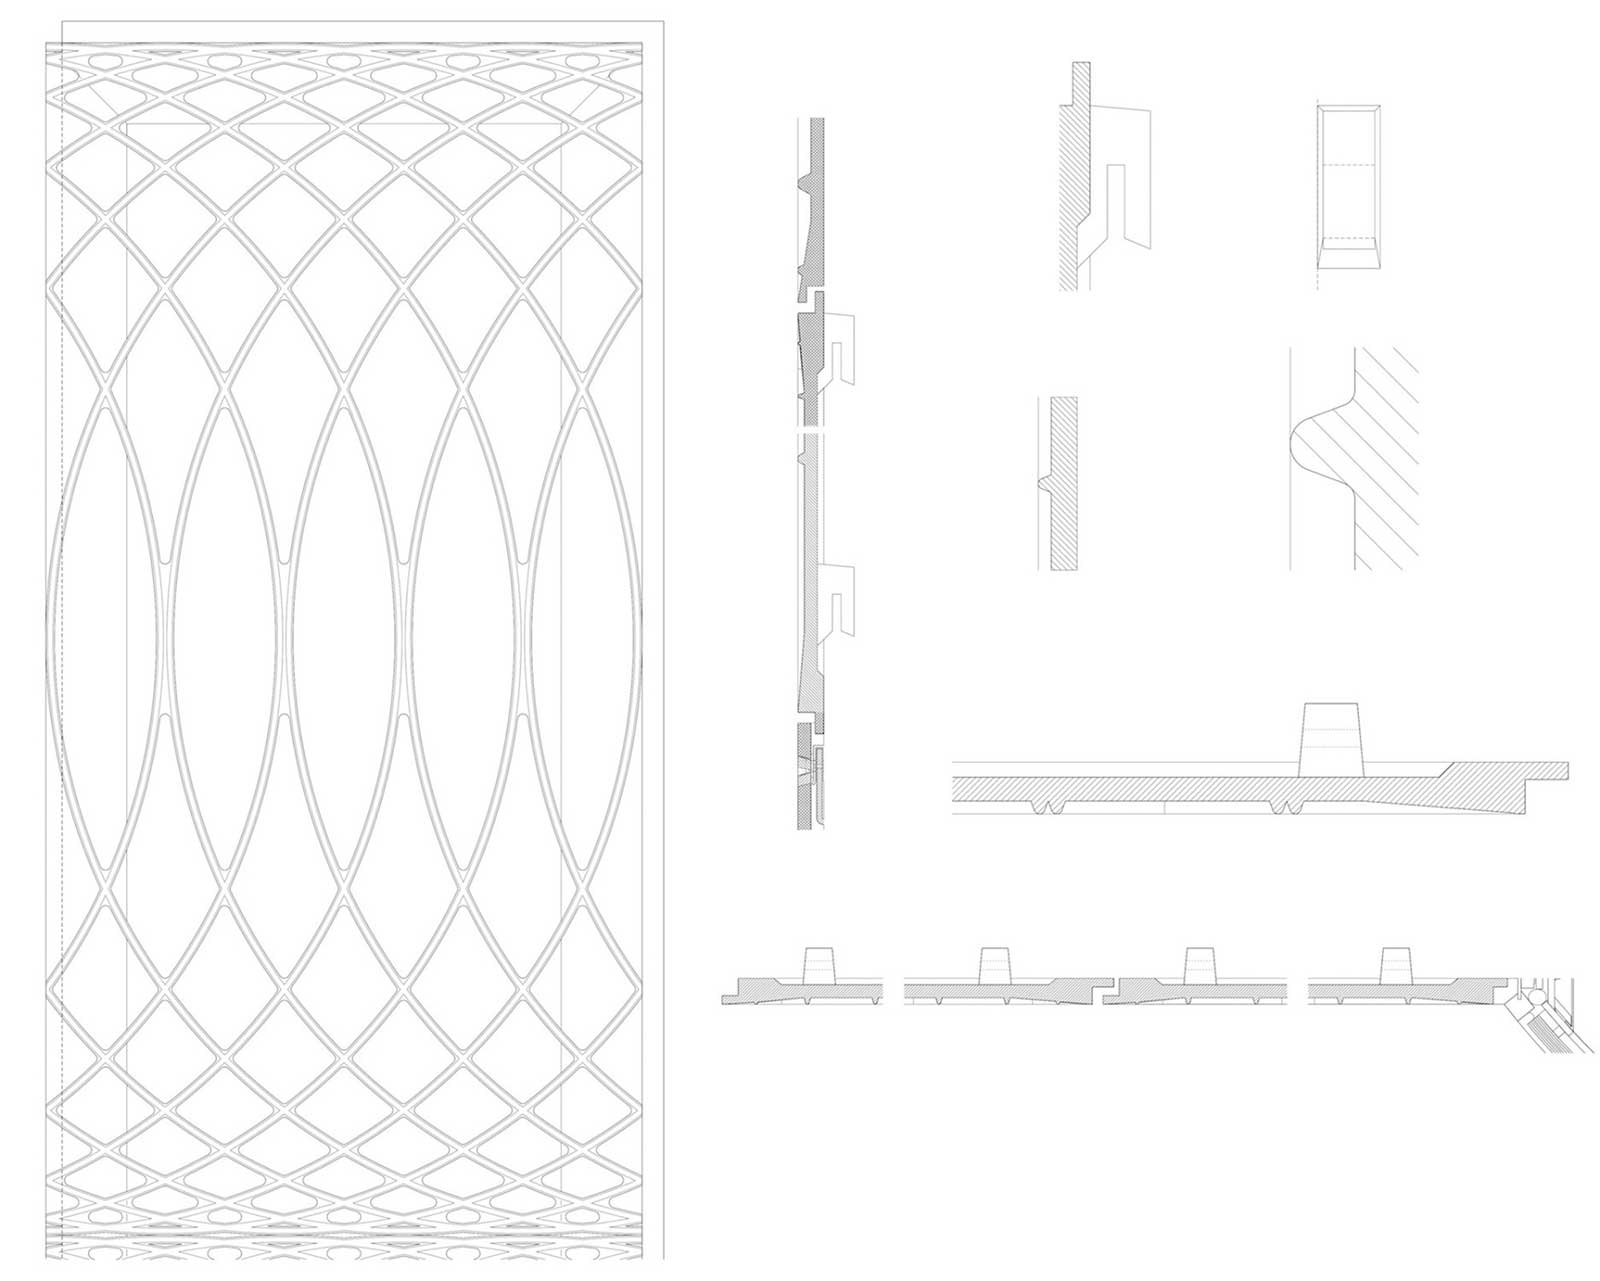 Detail Plans Paul Smith Retail Shop in London / 6a architects